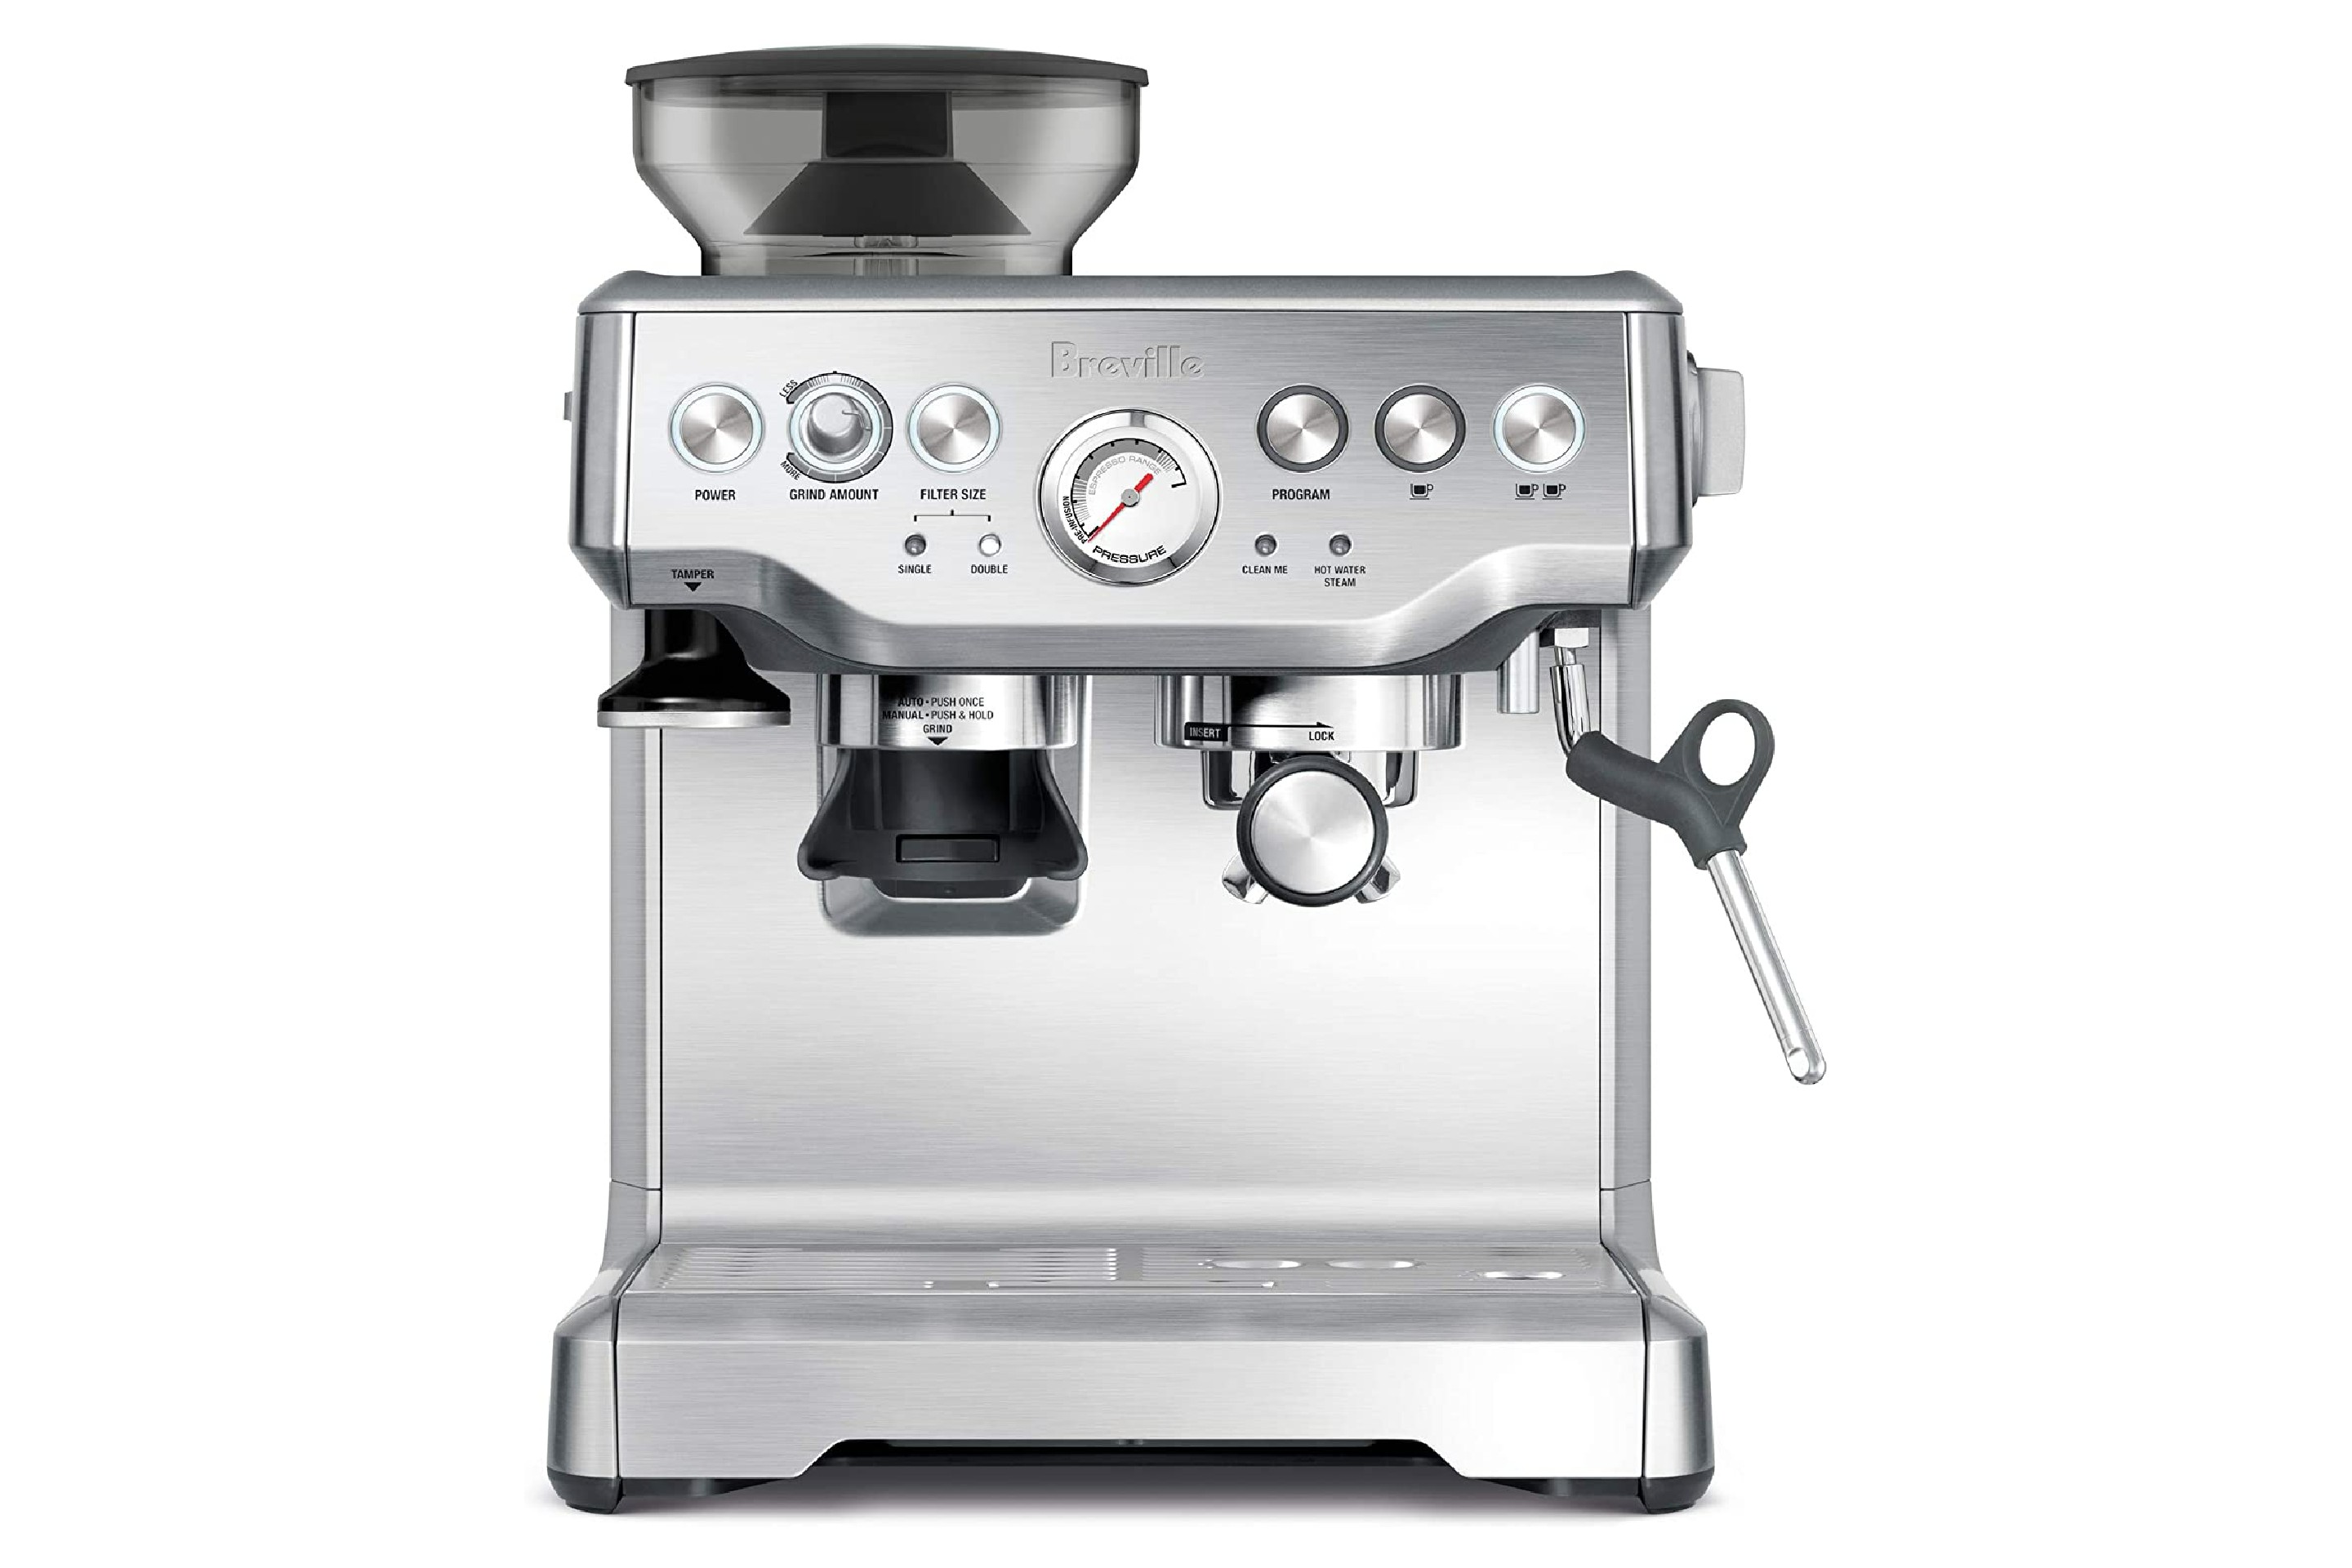 Best bean to cup coffee machines for coffee with convenience